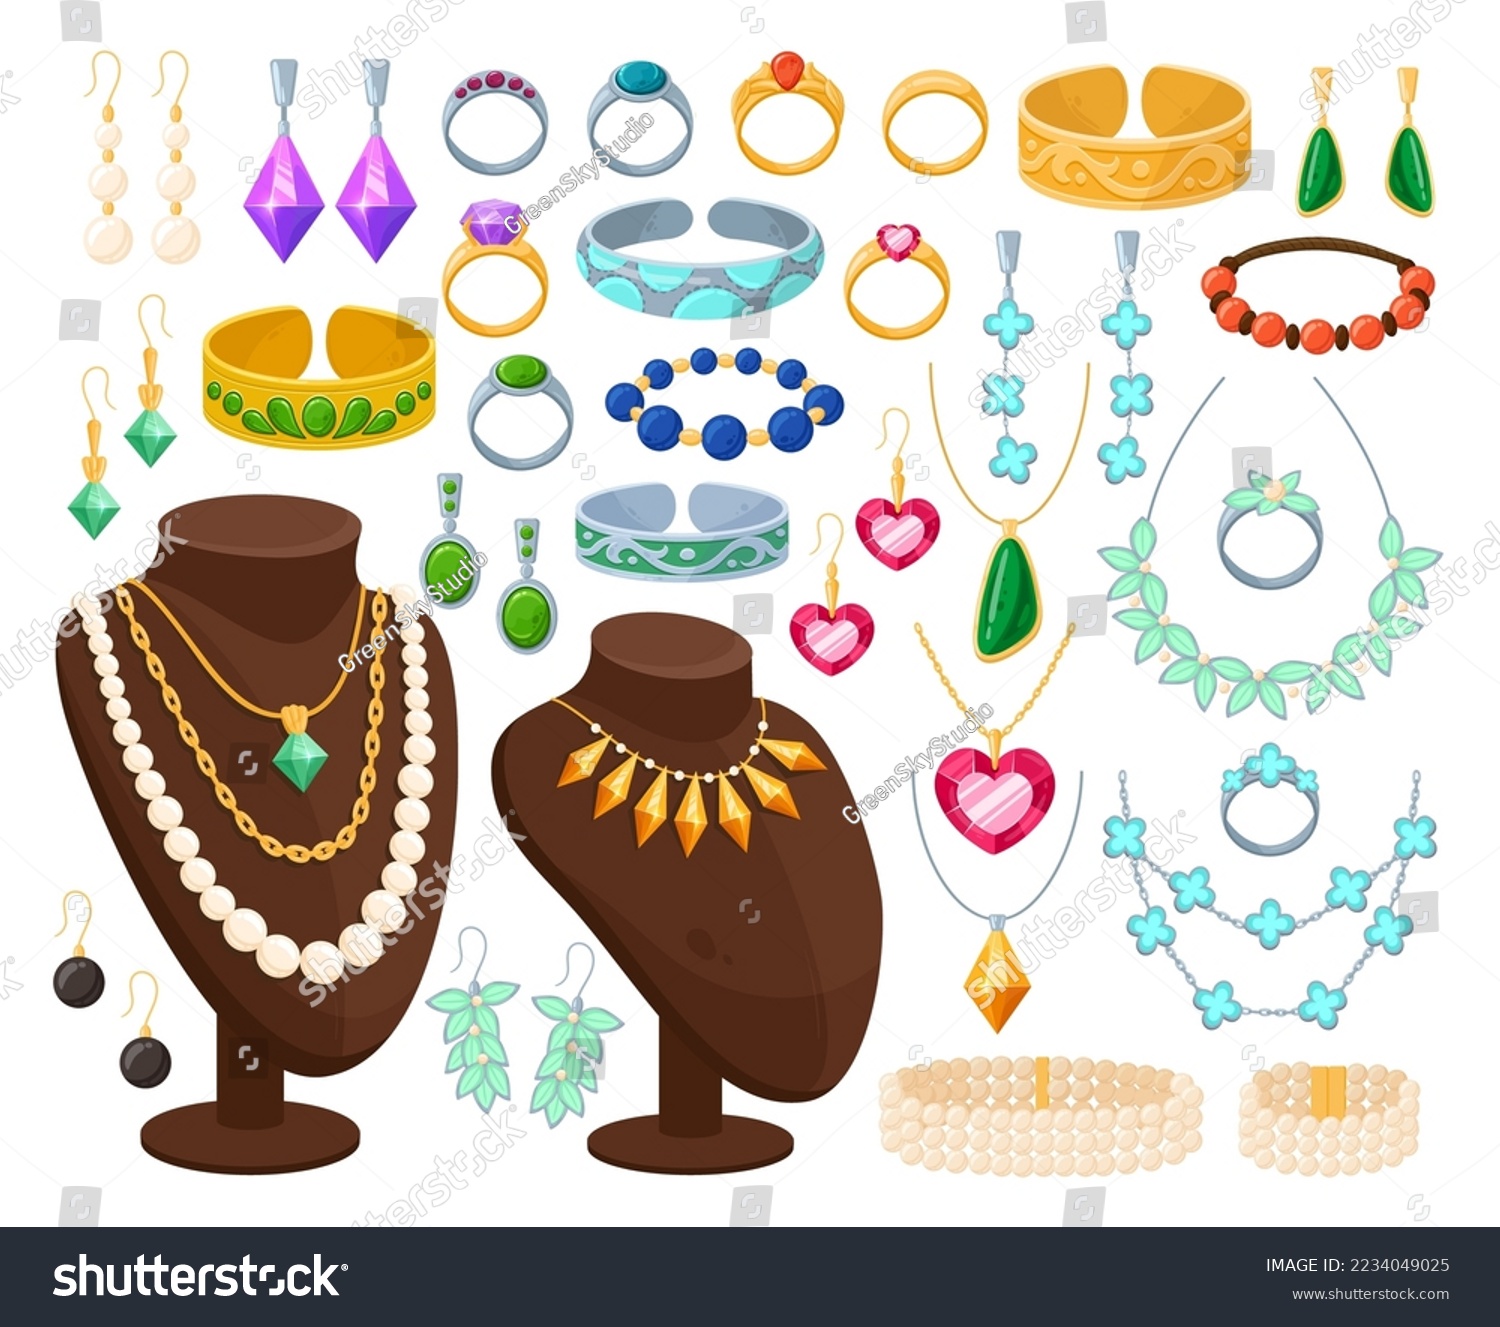 Cartoon gold and silver jewelry. Precious diamond necklace, golden earrings, pearl pendant, gemstone ring, brooch and bracelet flat vector illustration set. Glamorous jewelry accessories #2234049025